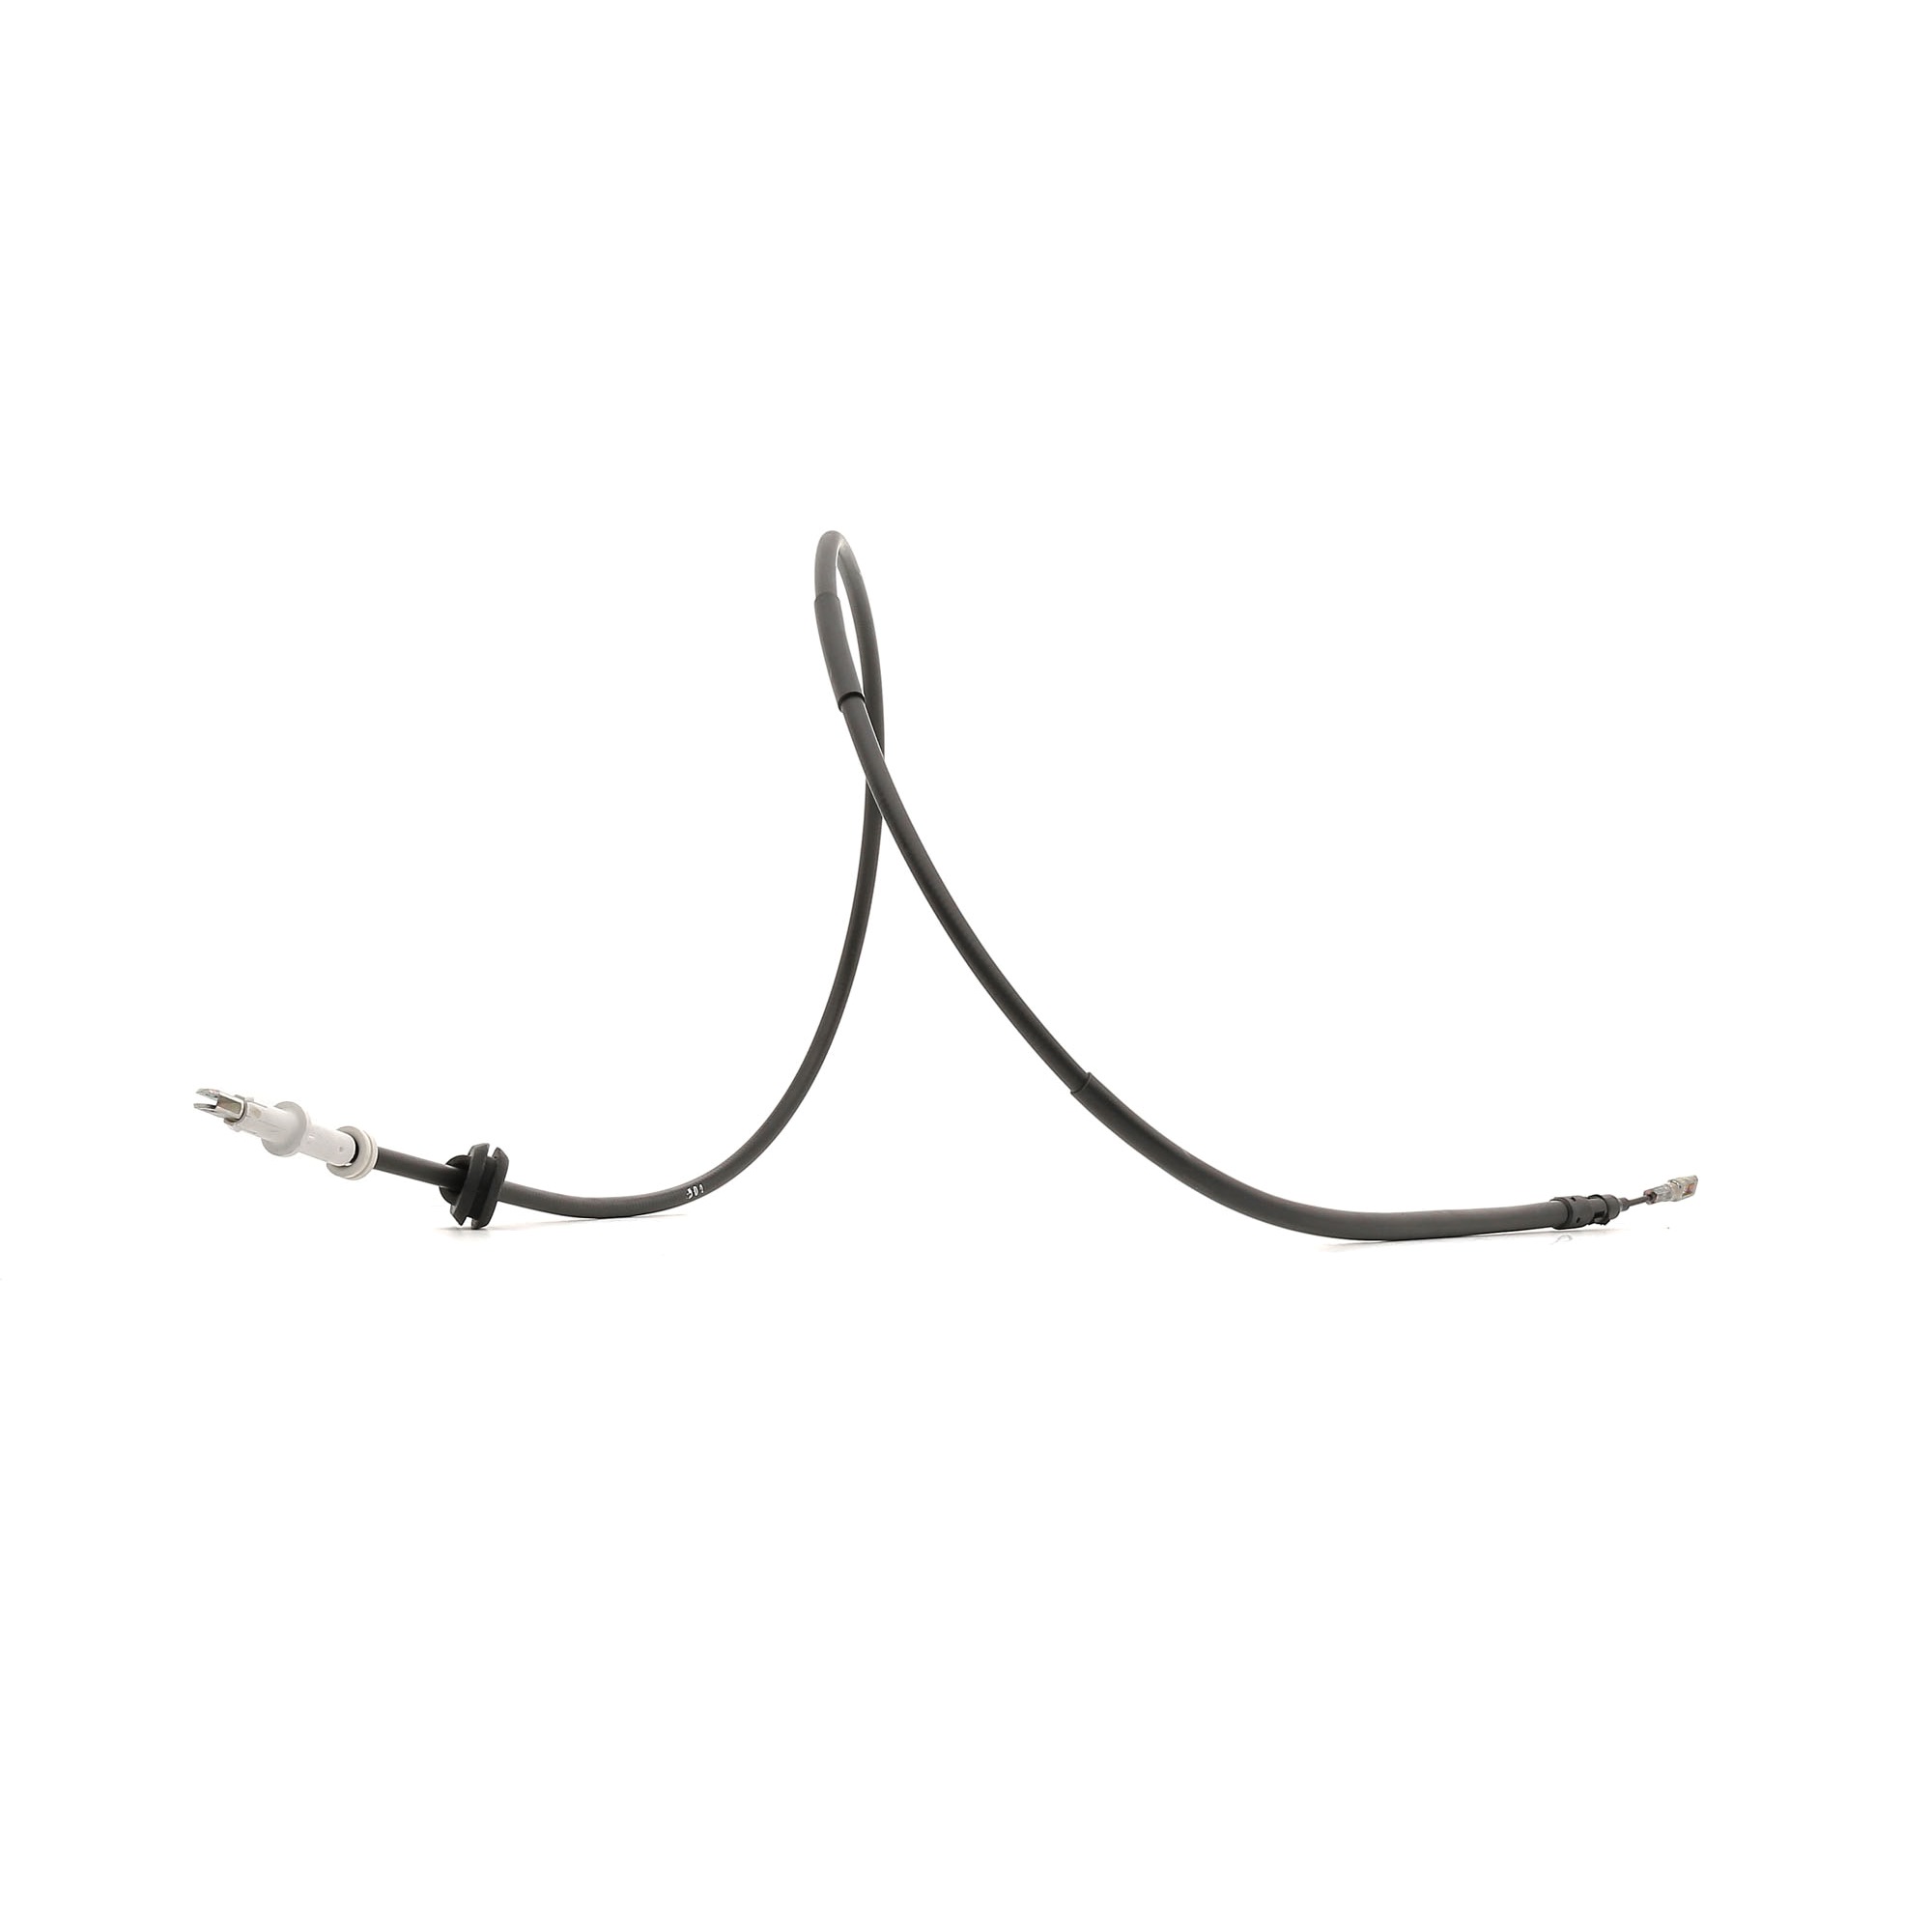 BOSCH 1 987 477 897 Hand brake cable 1726mm